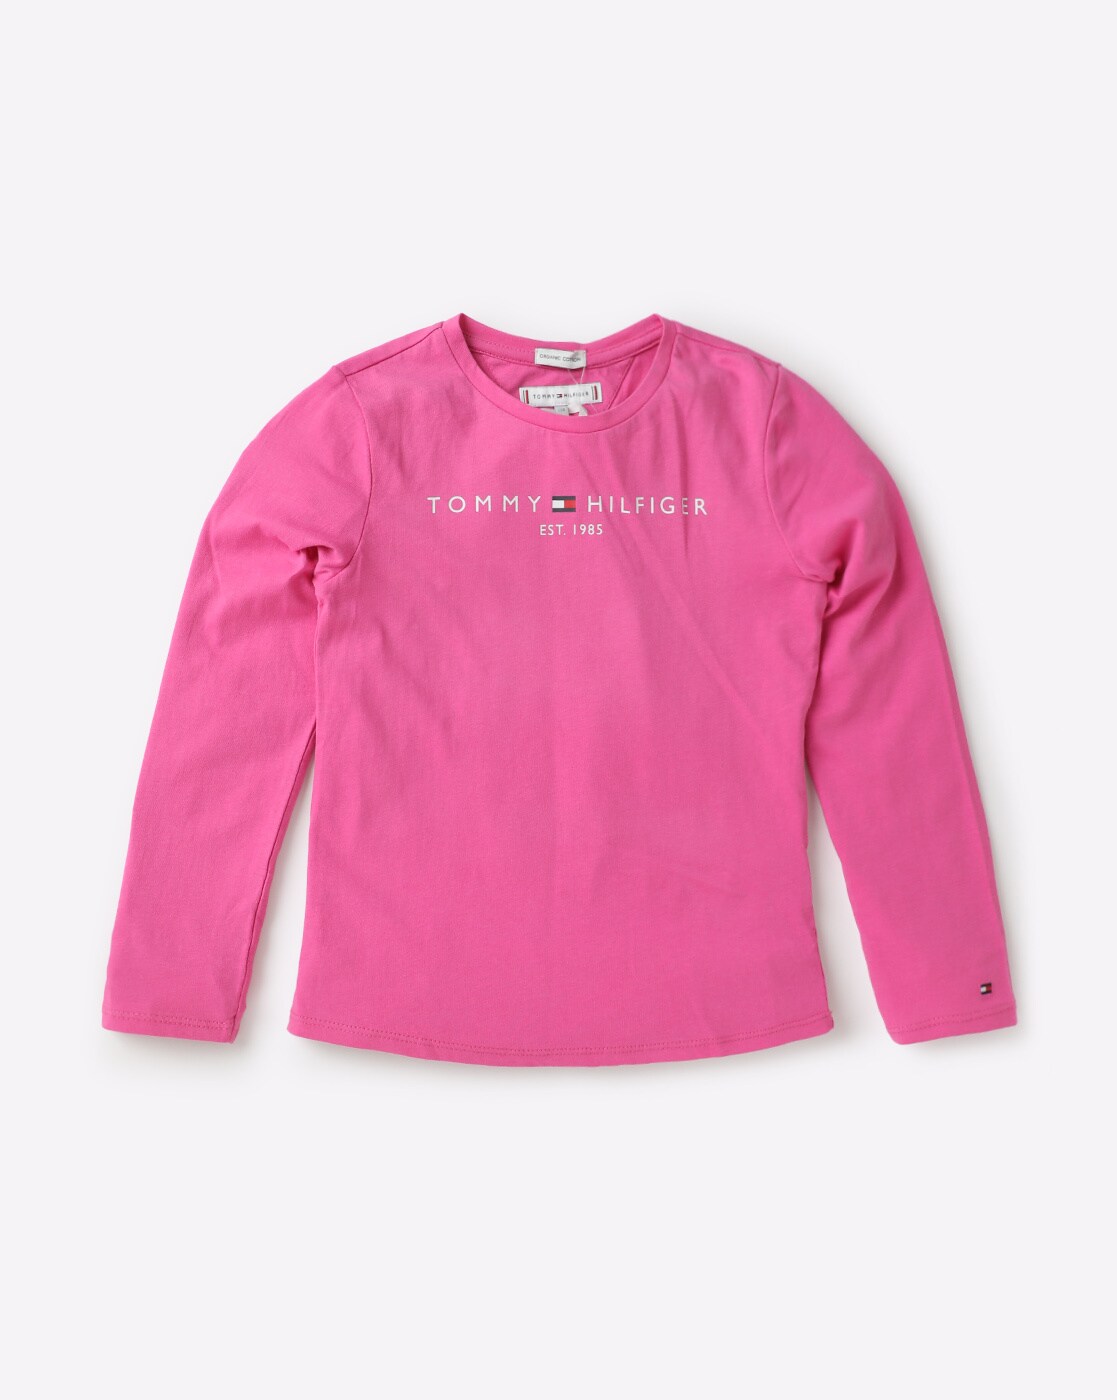 TOMMY for Tshirts Online HILFIGER by Pink Girls Buy